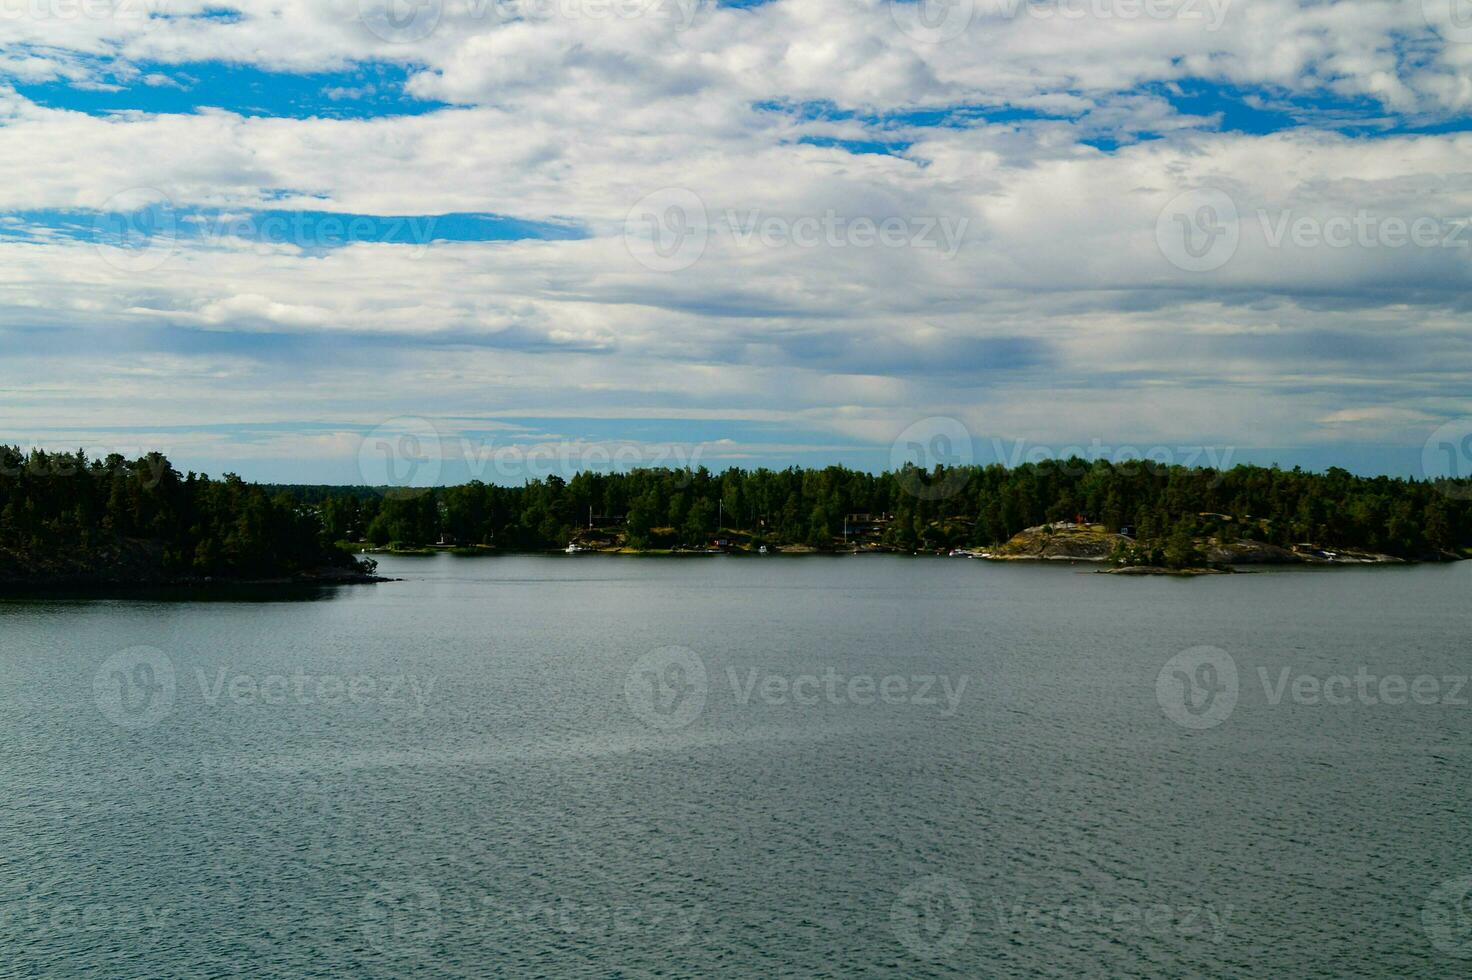 With the cruise ship through the archipelago of Stockholm Sweden photo